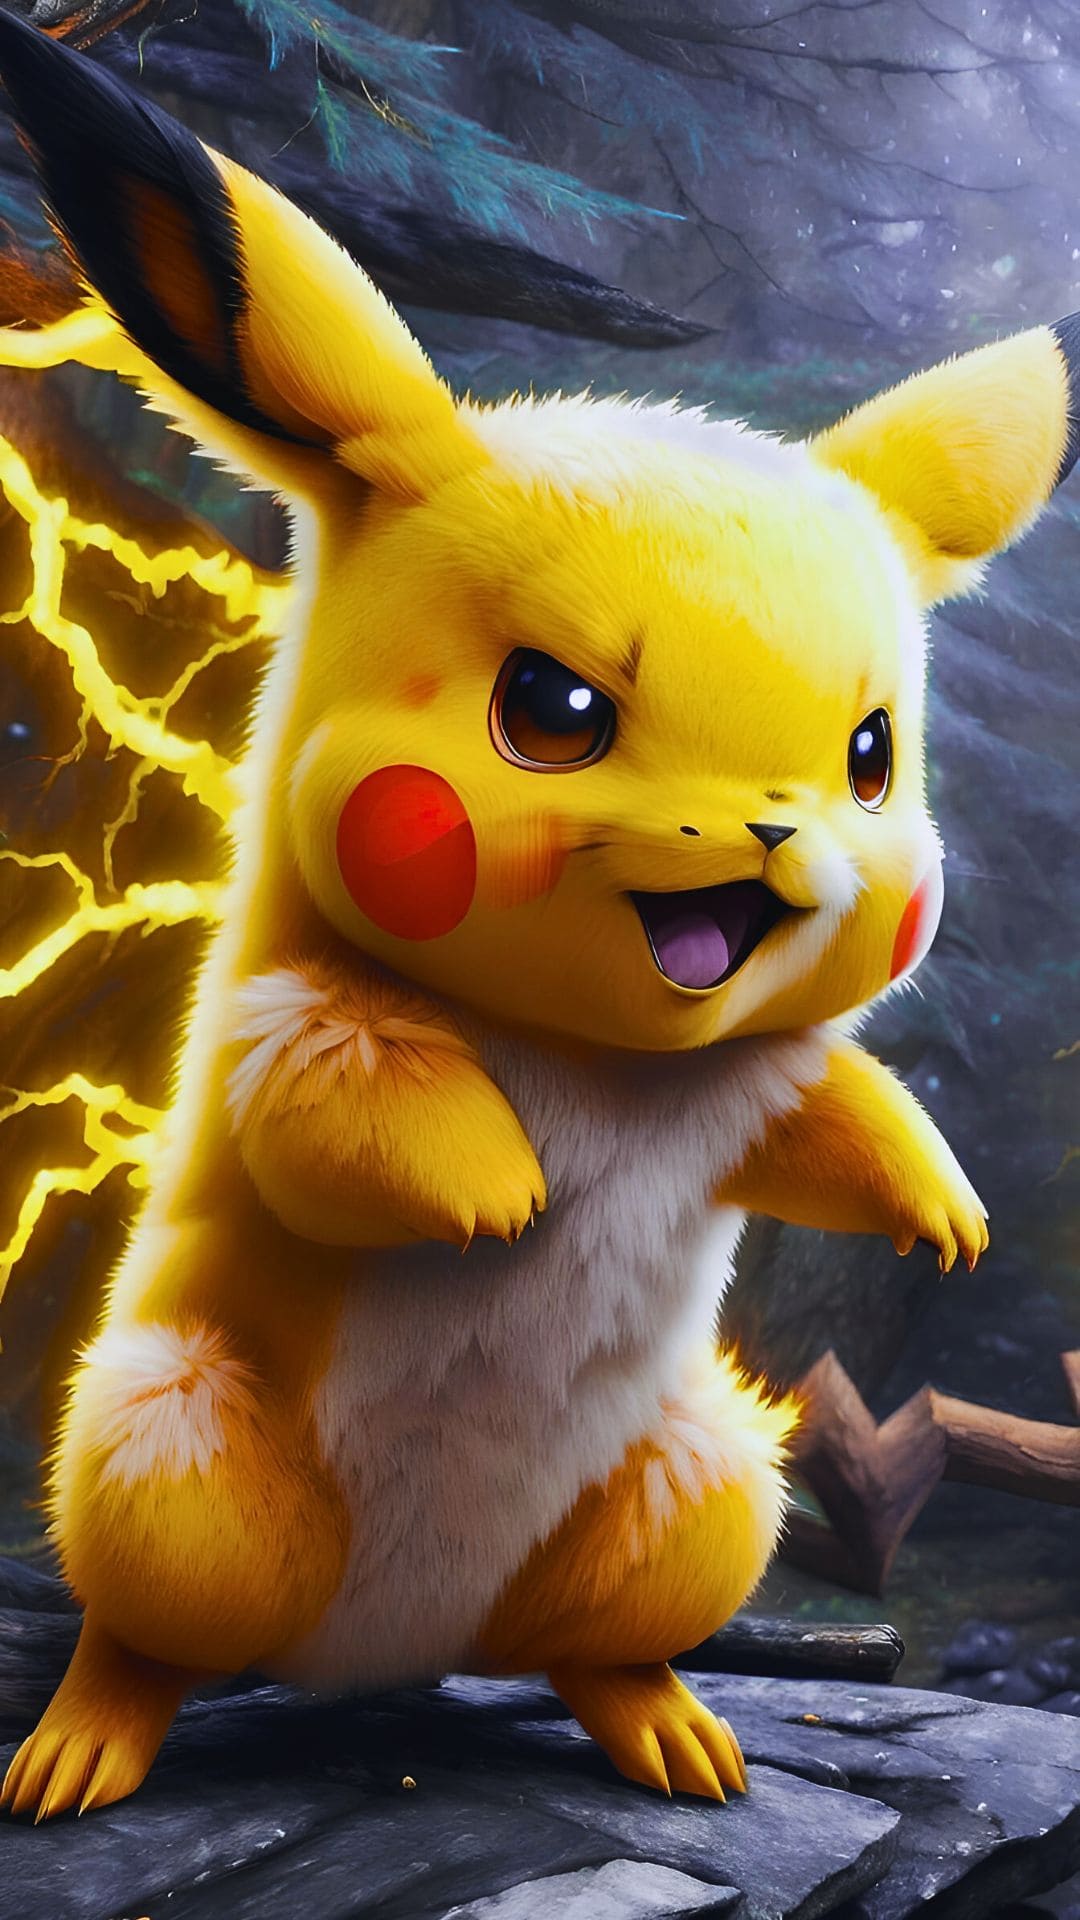 Pikachu Wallpaper Android